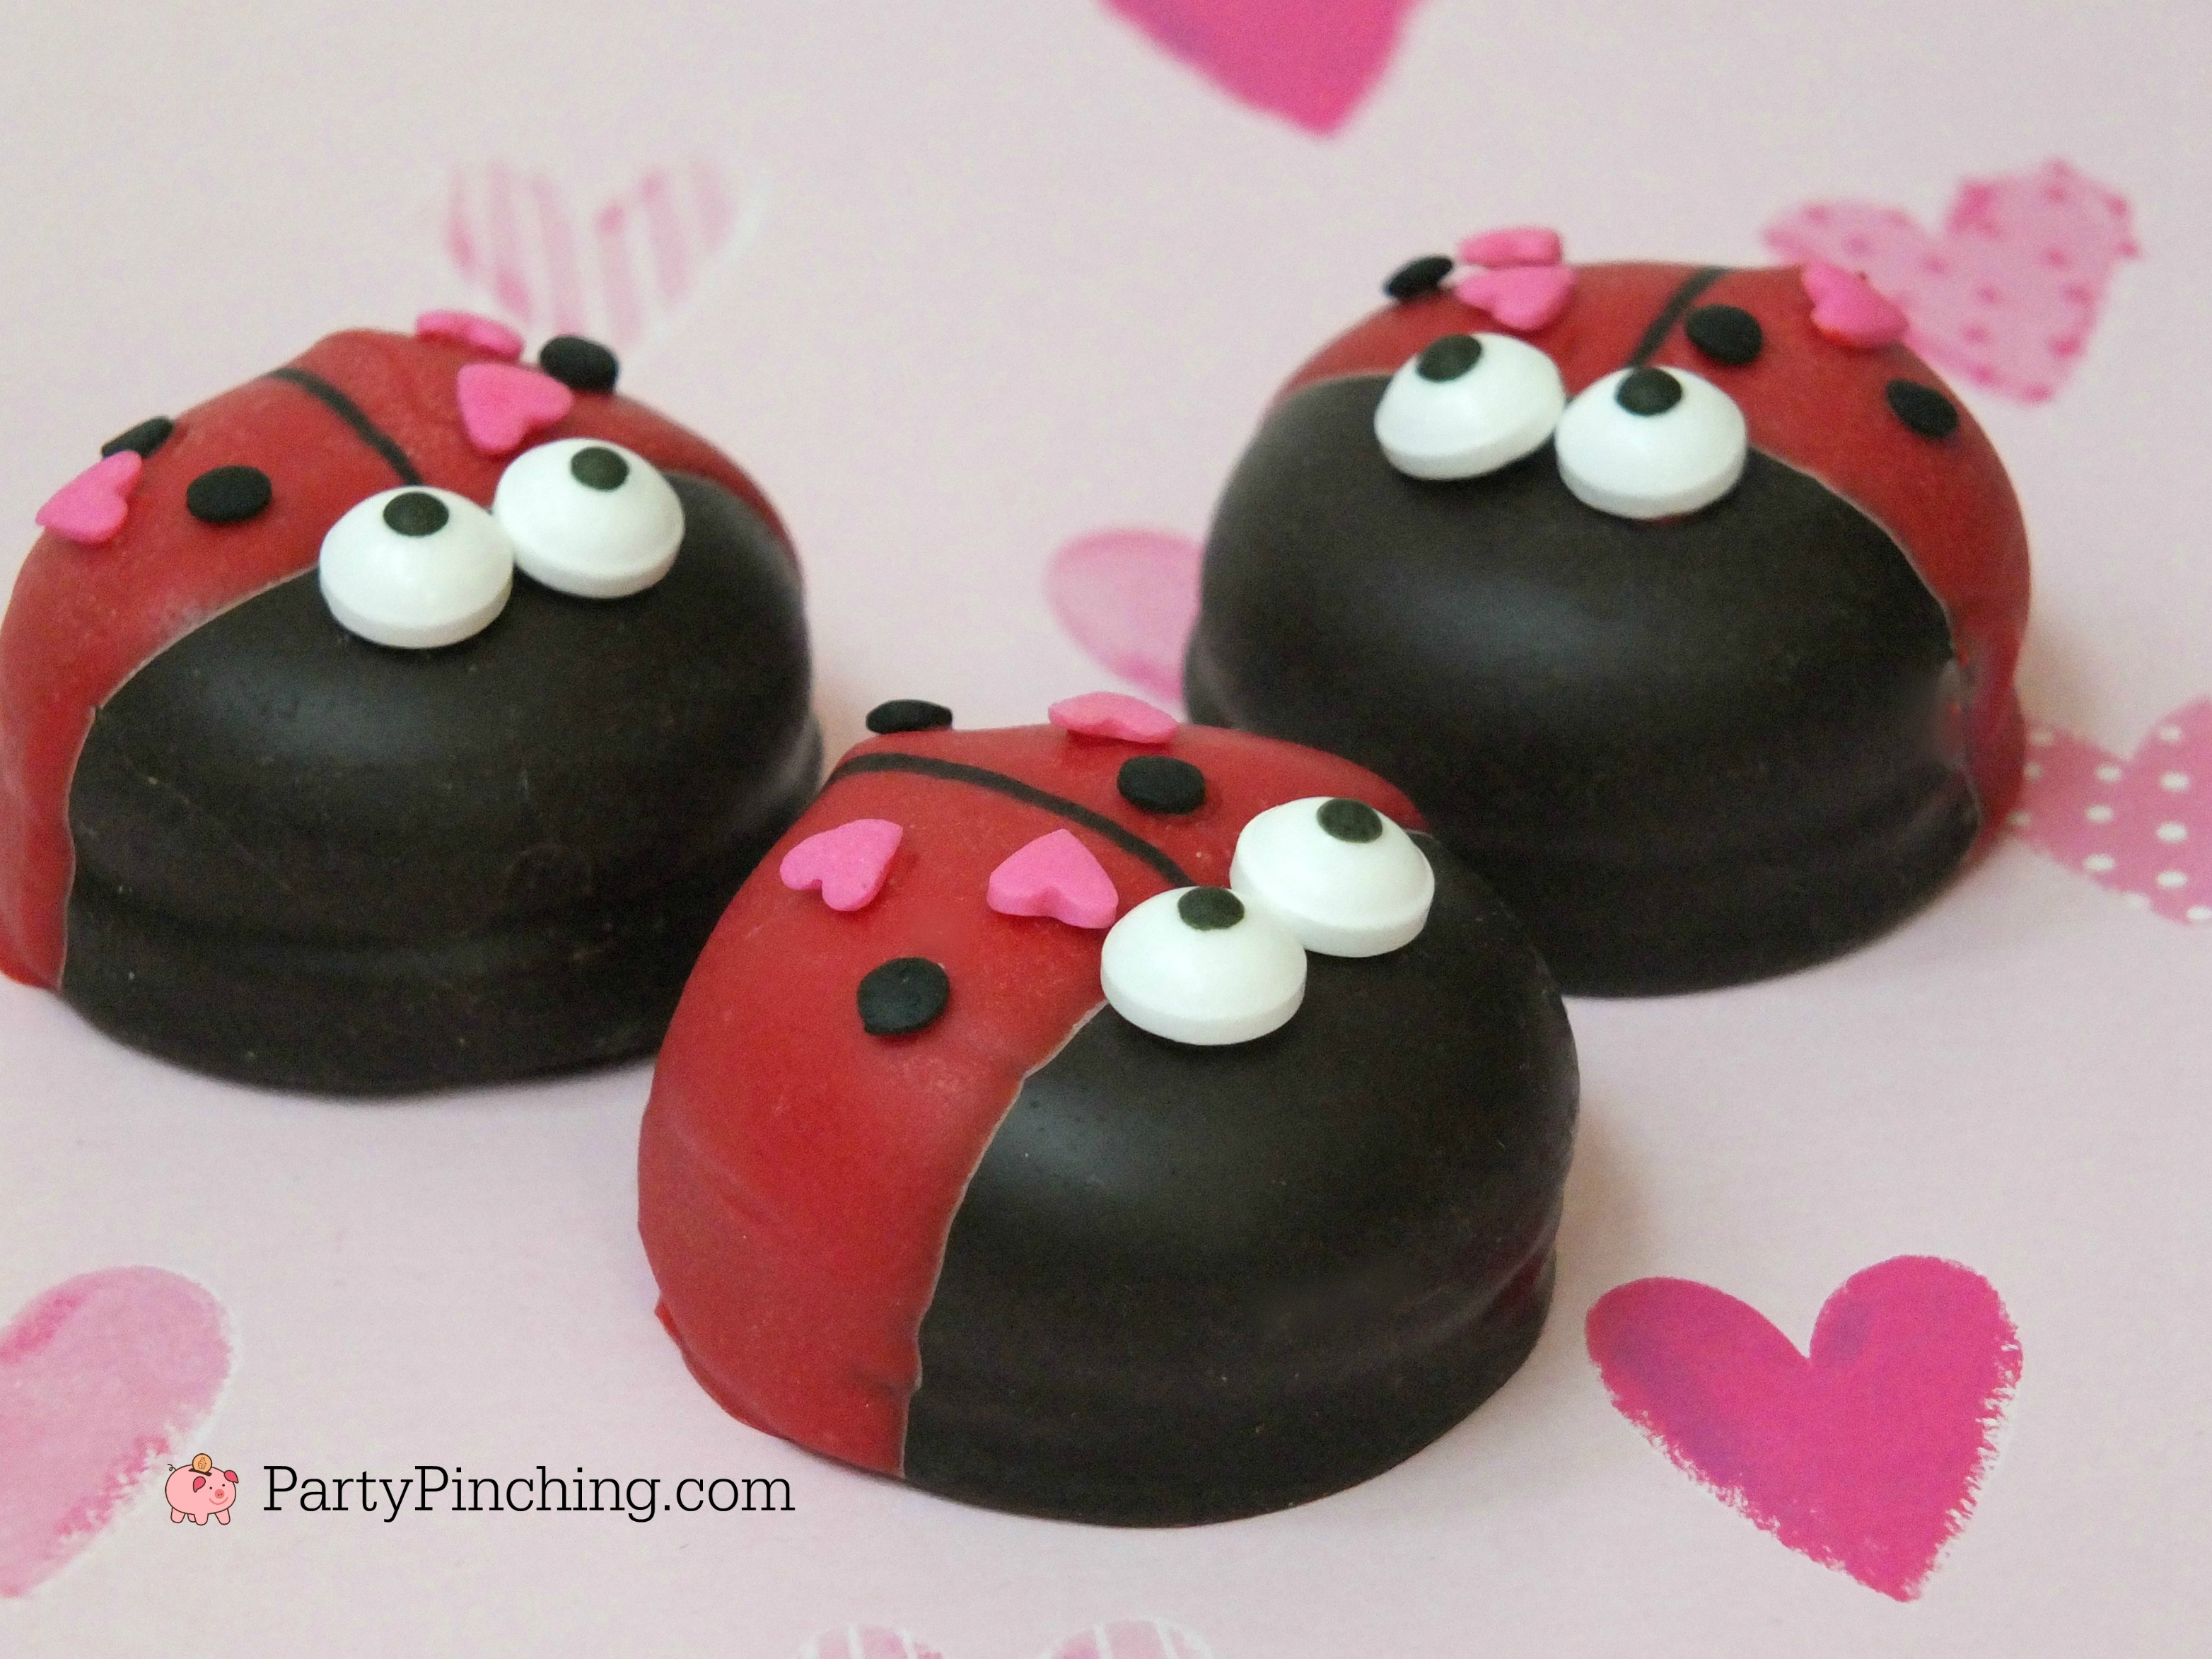 Valentine's Day love bug Mallomar cookies, cute cookies for Valentine's day, adorable treat ideas for kids Valentine's party